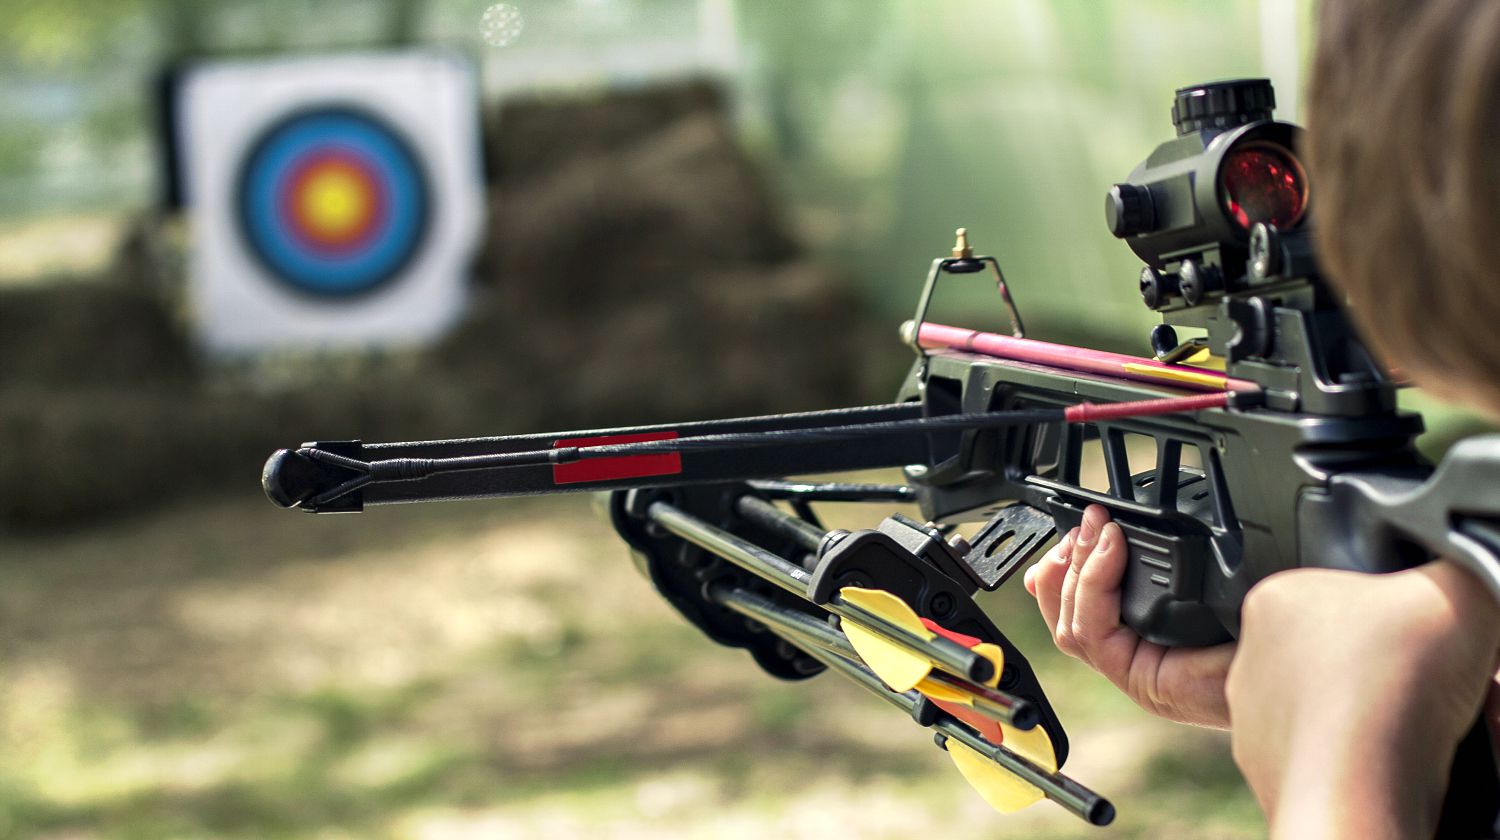 Featured | The shooter directed the crossbow towards the colored target | Crossbow Shooting 101: How To Improve Your Shooting Skills